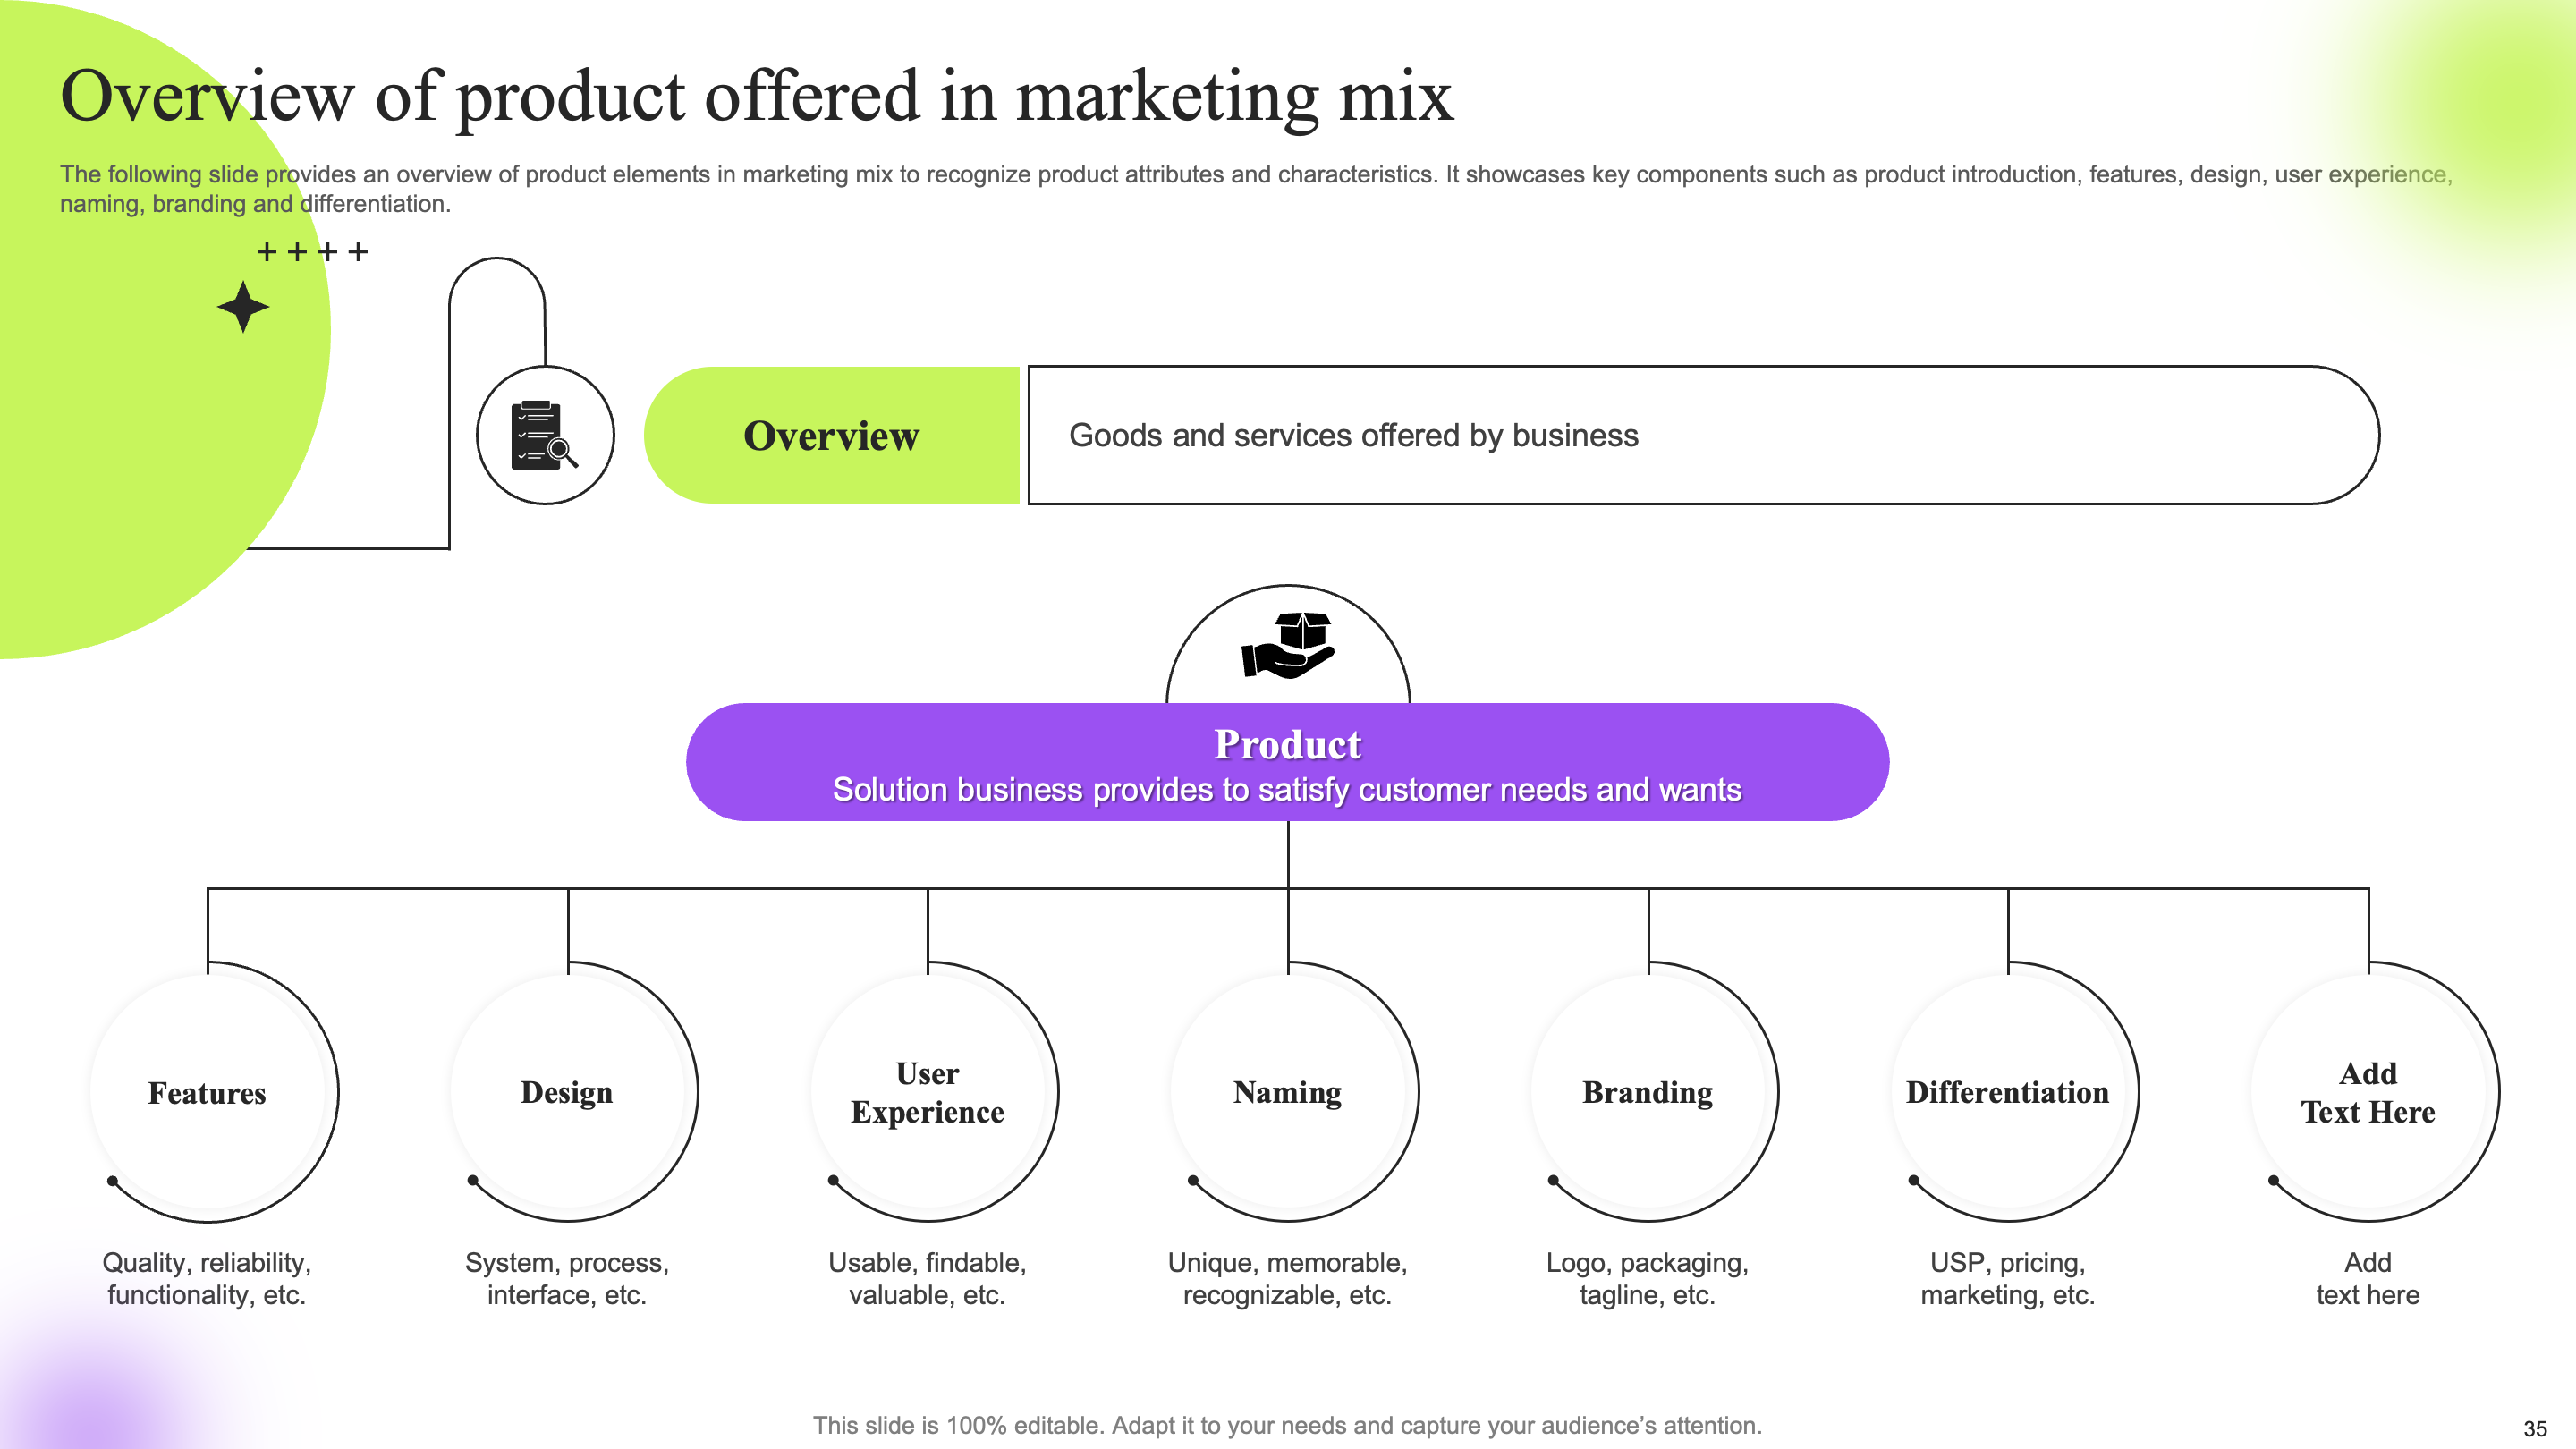 Overview of product offered in marketing mix 